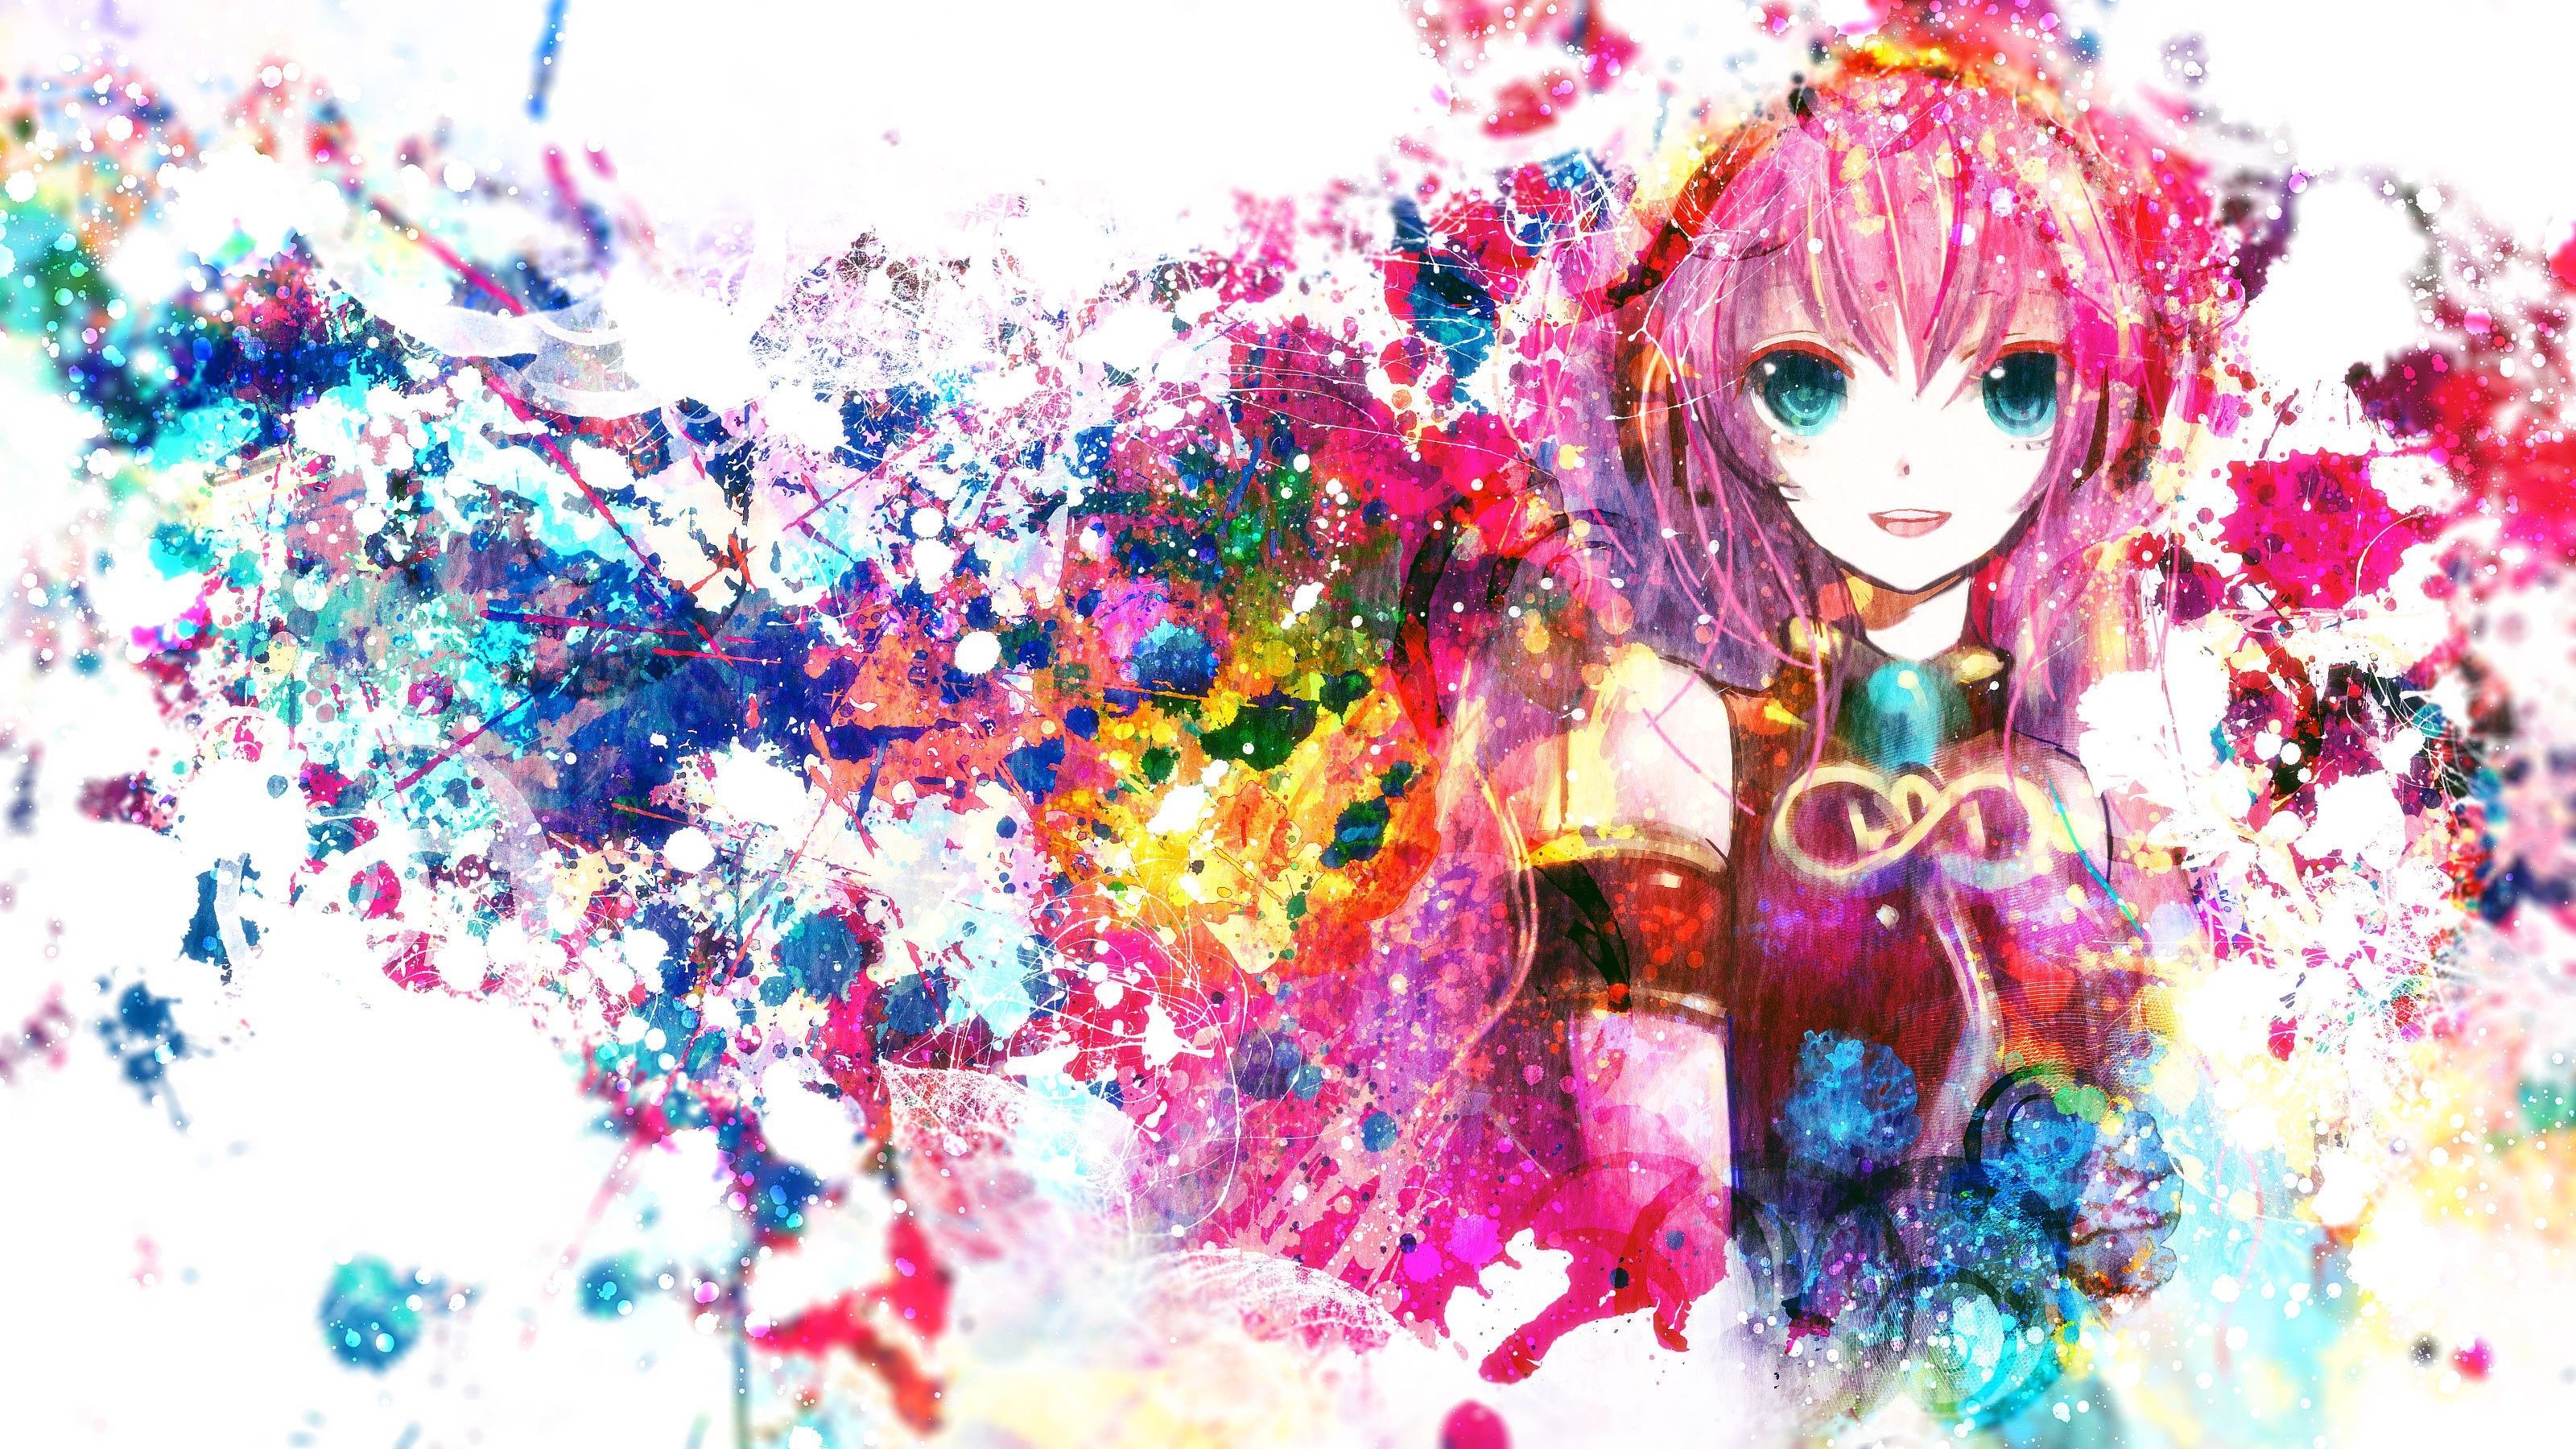 vocaloid picture: Wallpaper Collection category. Anime wallpaper, Vocaloid, Anime art